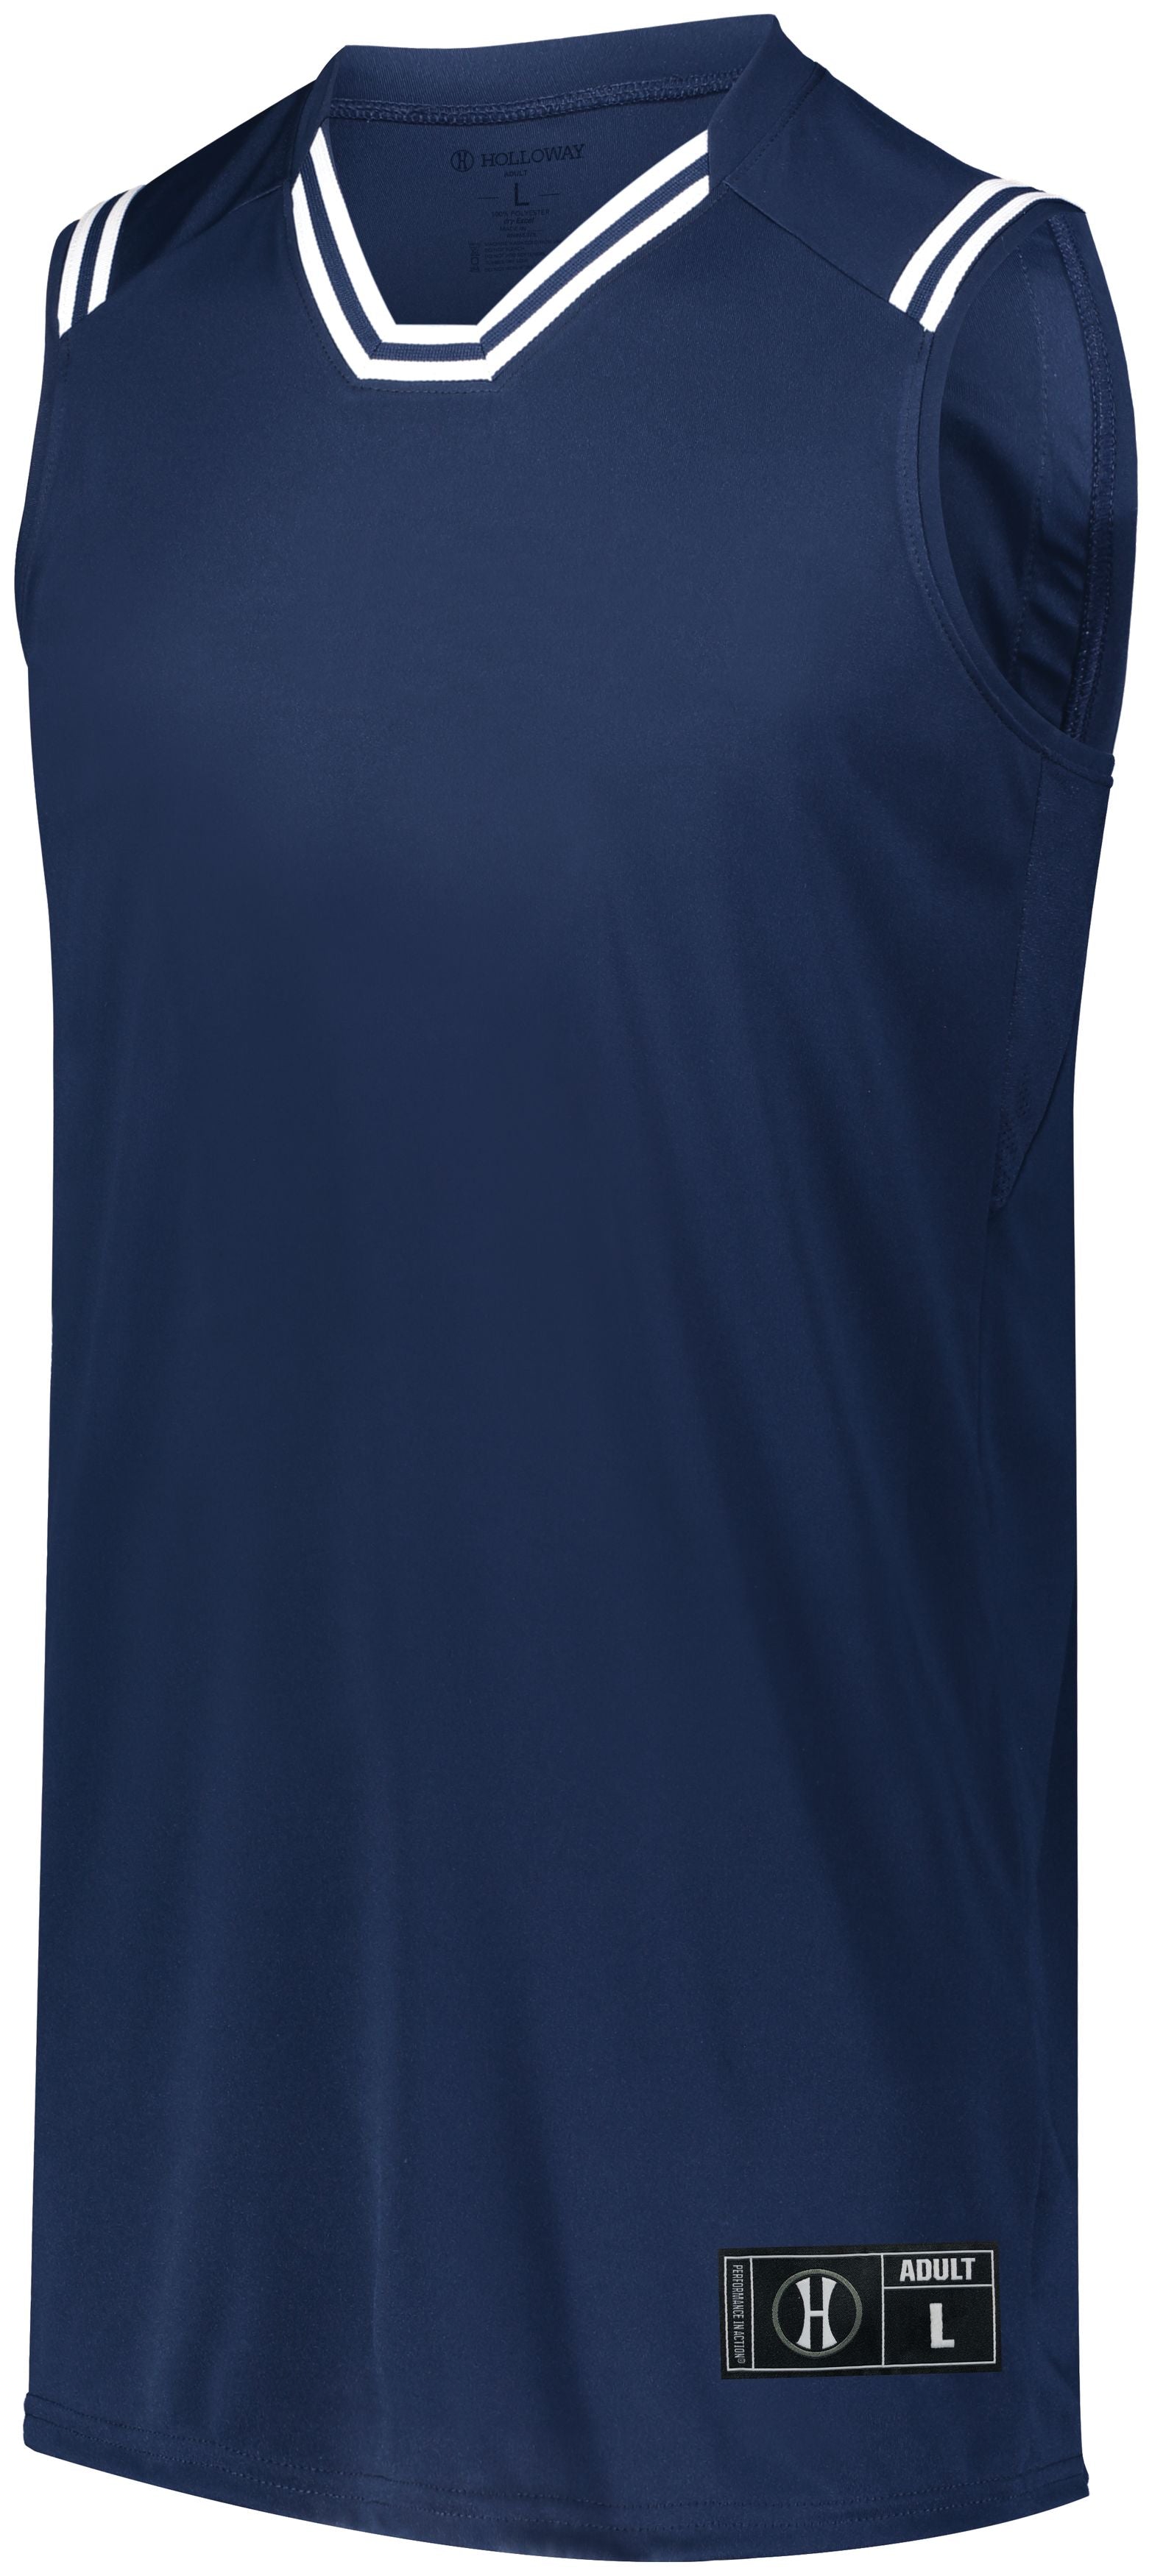 Holloway Retro Basketball Jersey in Navy/White  -Part of the Adult, Adult-Jersey, Basketball, Holloway, Shirts, All-Sports, All-Sports-1 product lines at KanaleyCreations.com